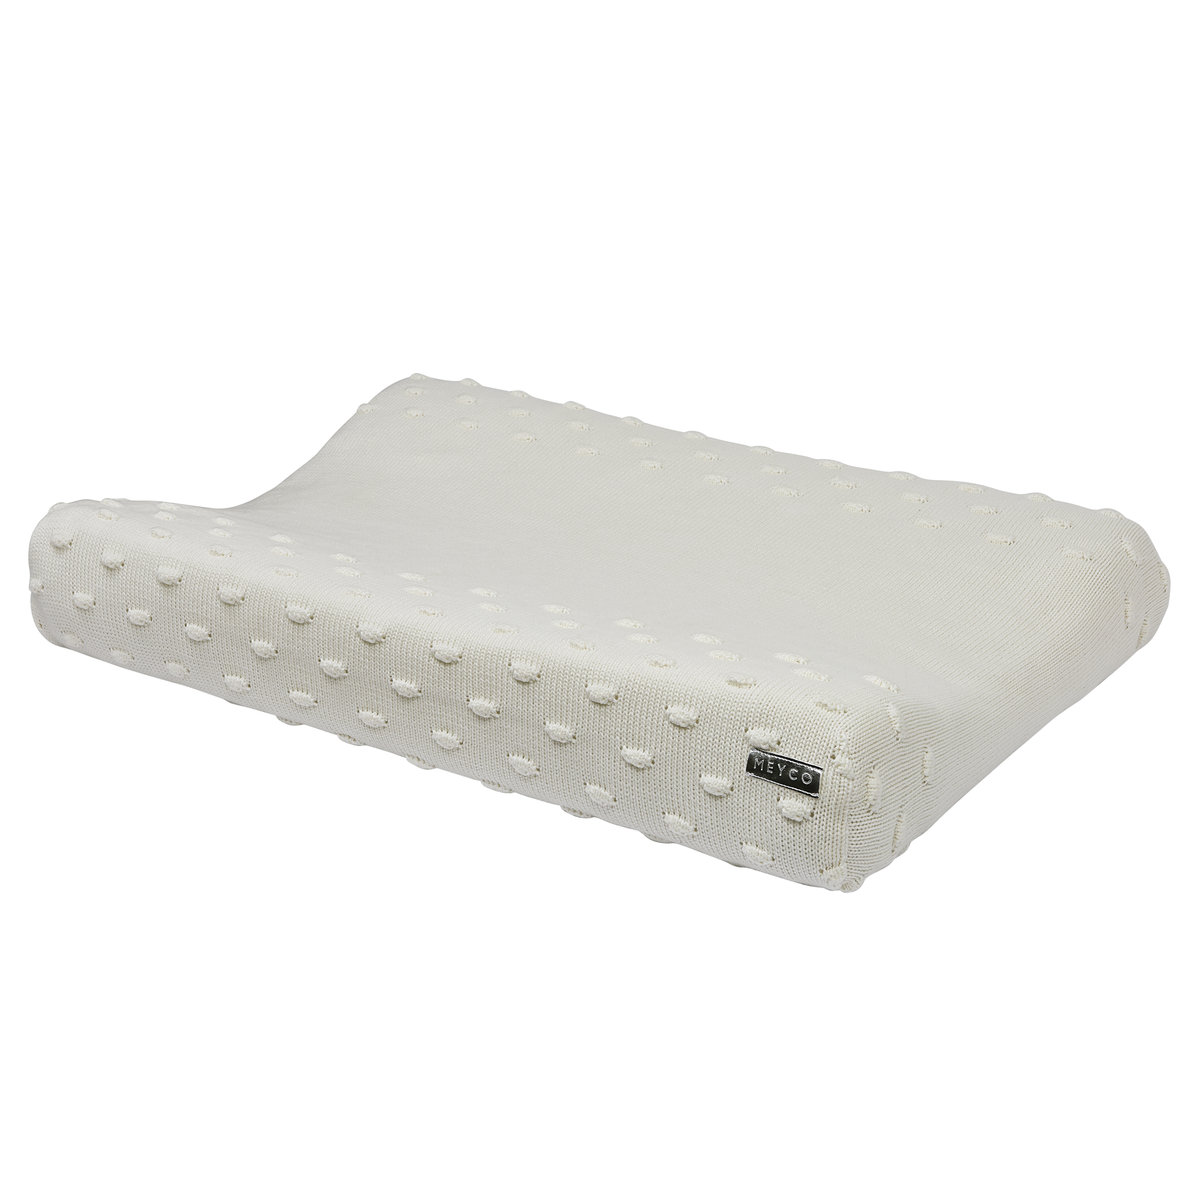 Meyco Changing Pad Cover Knots - 50x70 cm.